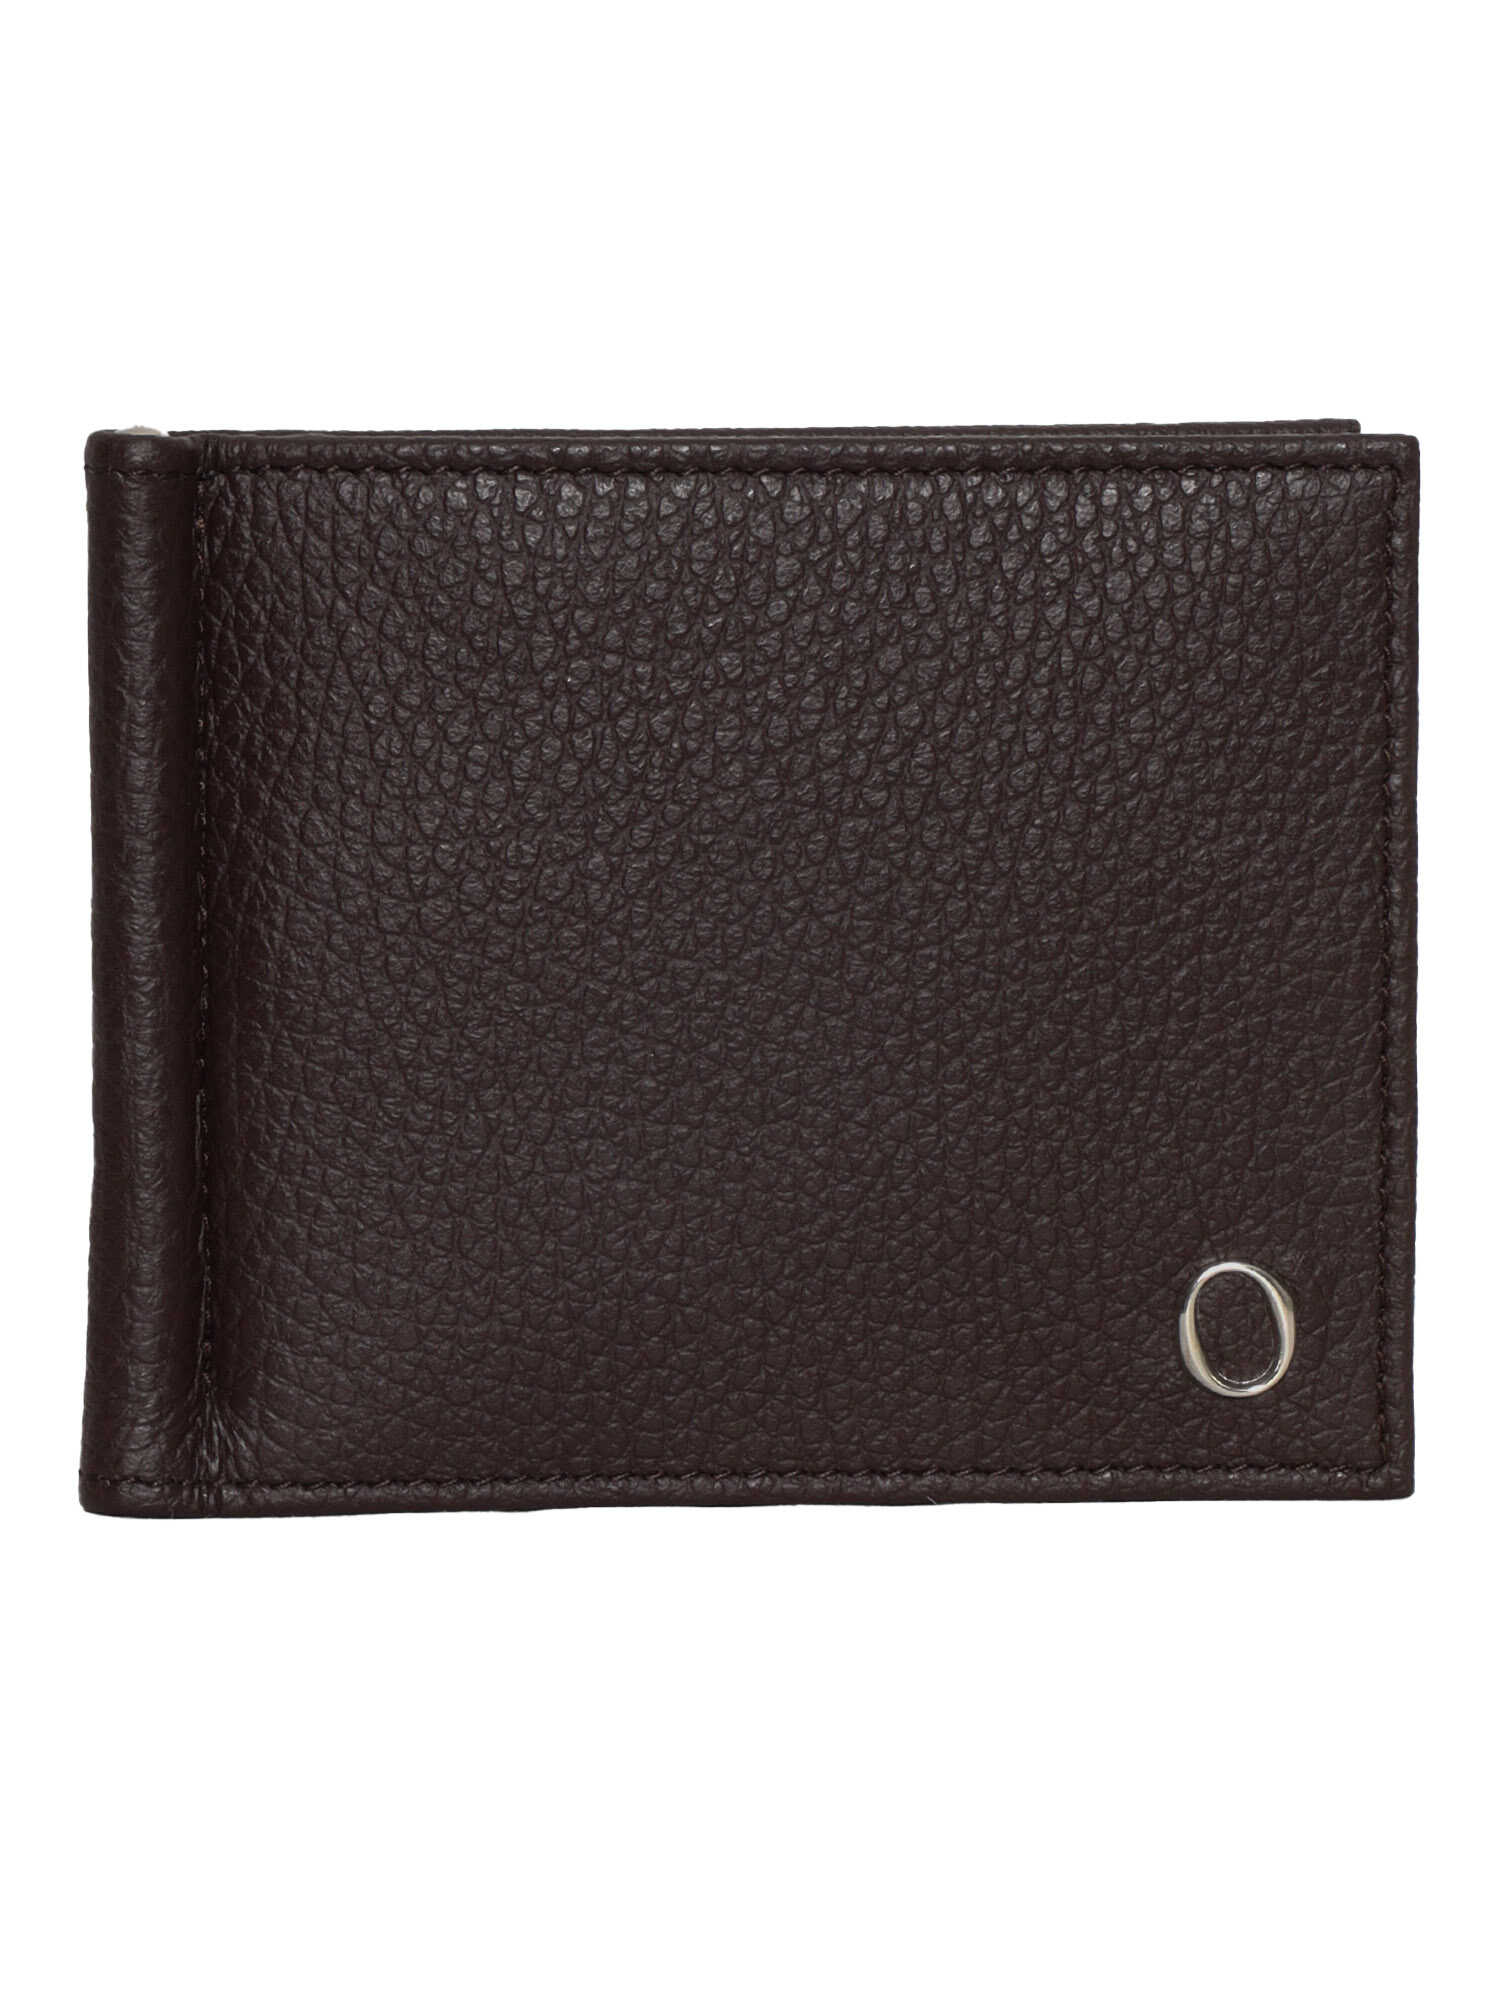 Claudio Orciani Micron wallet Brown